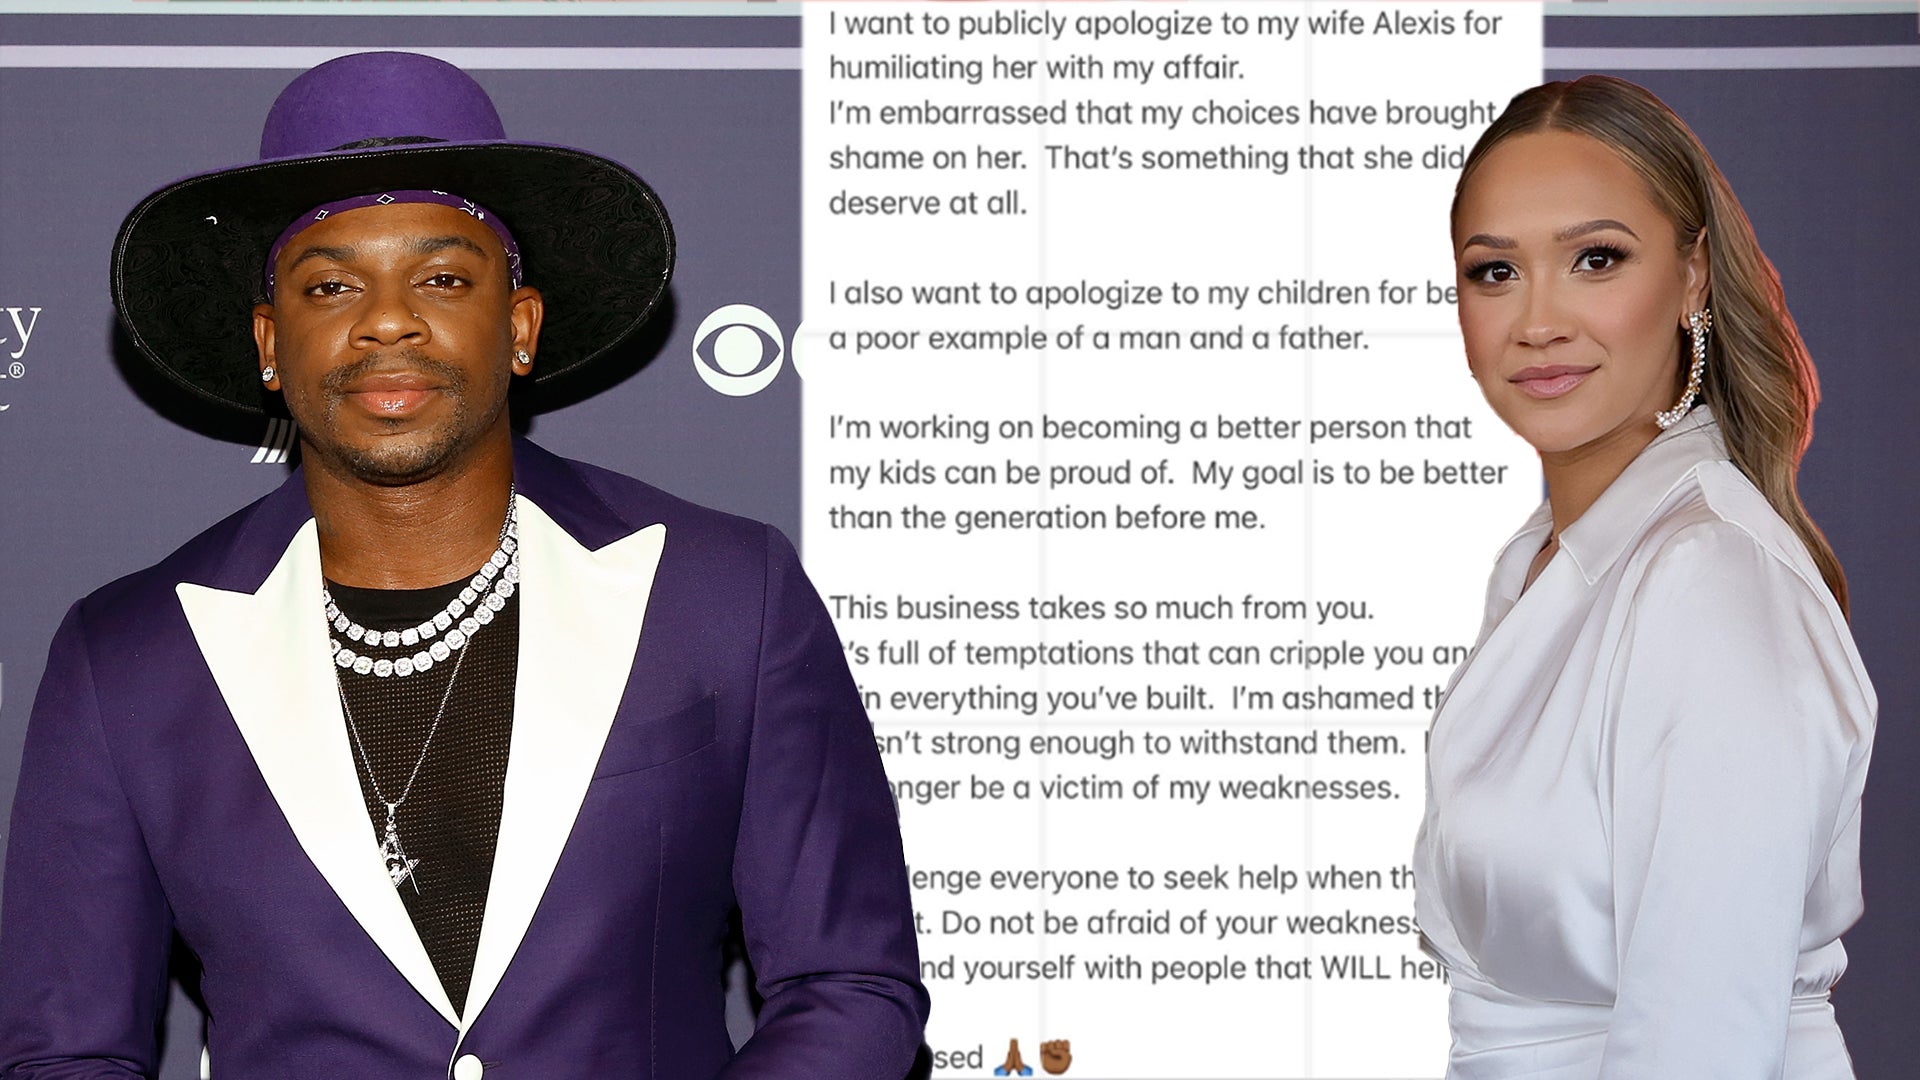 Jimmie Allen Apologizes to Wife Alexis for Having Alleged Affair Following Sexual Assault Lawsuit Entertainment Tonight pic